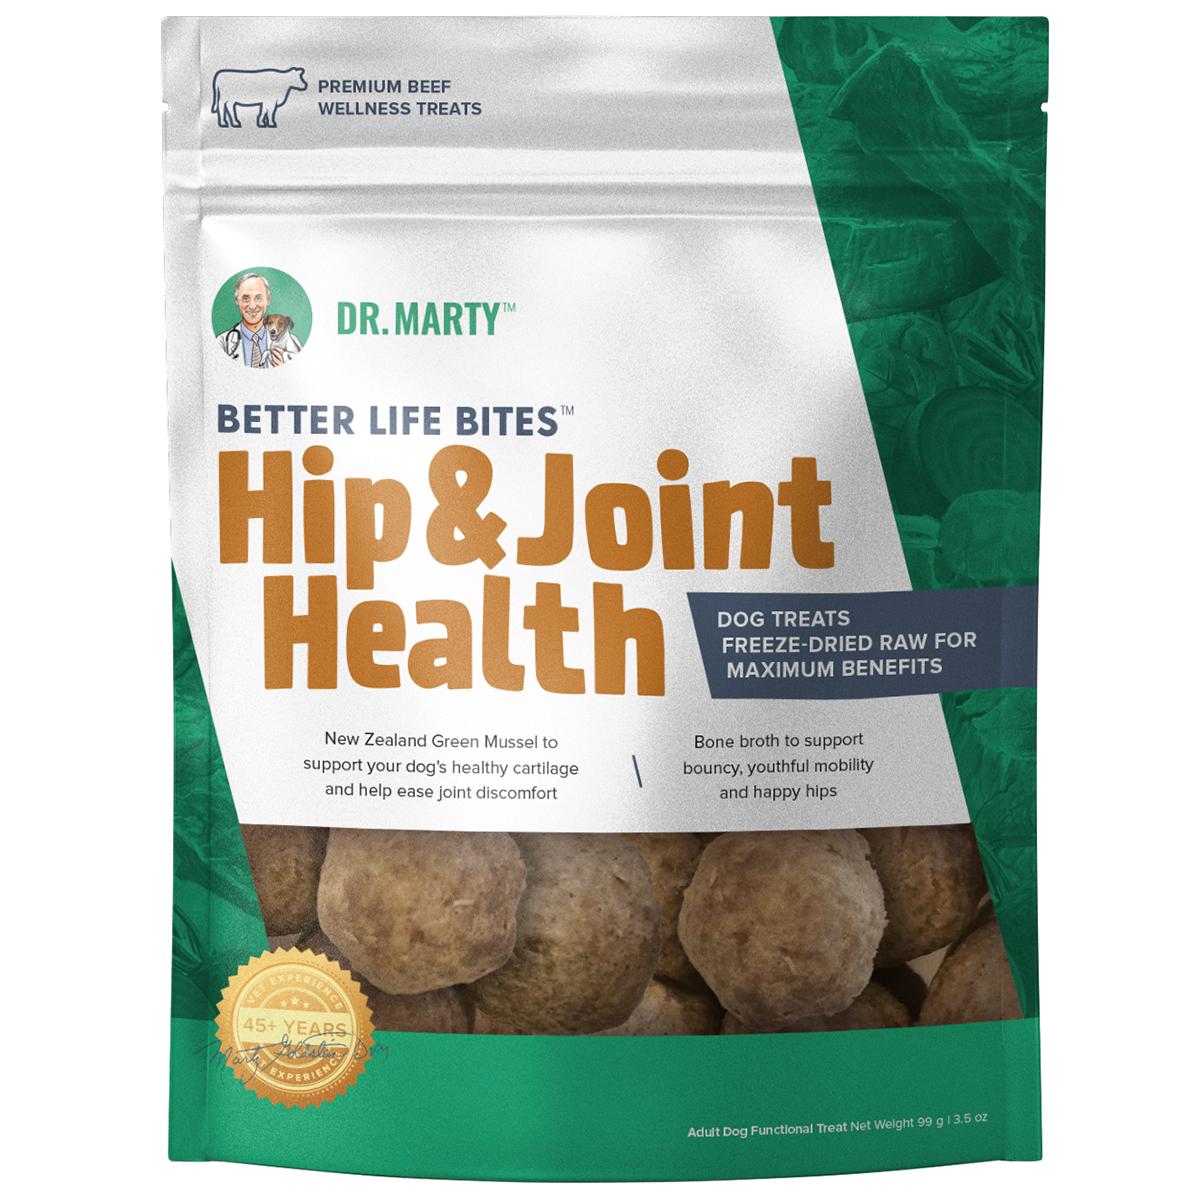 dr-marty-better-life-bites-hip-joint-health-freeze-dried-dog-treats-